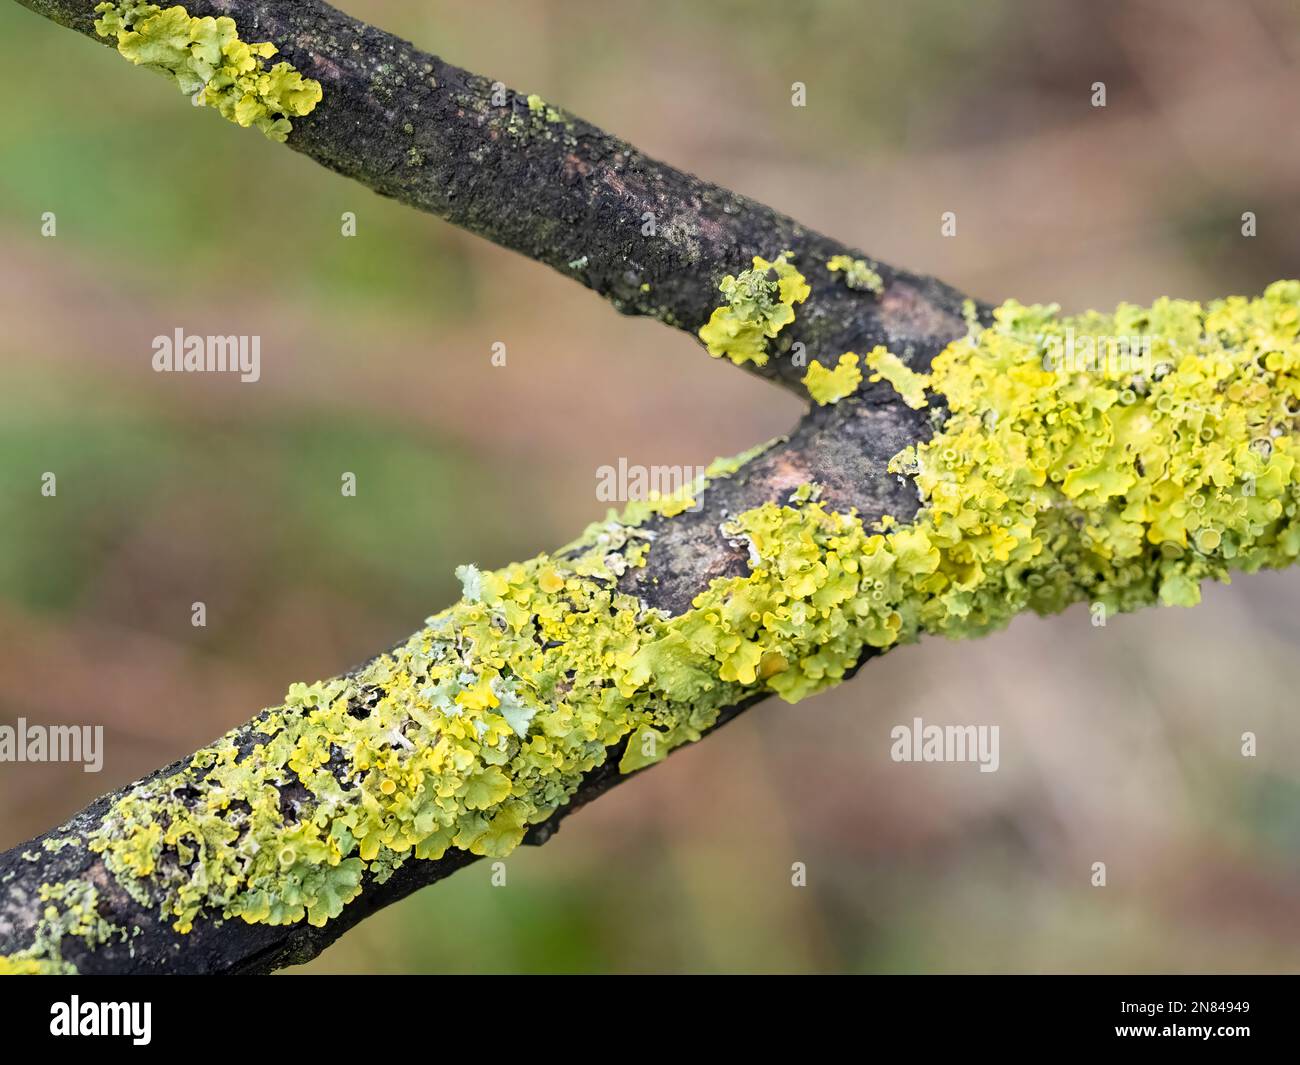 Lichen of the Foliose family, growing on a tree branch Stock Photo